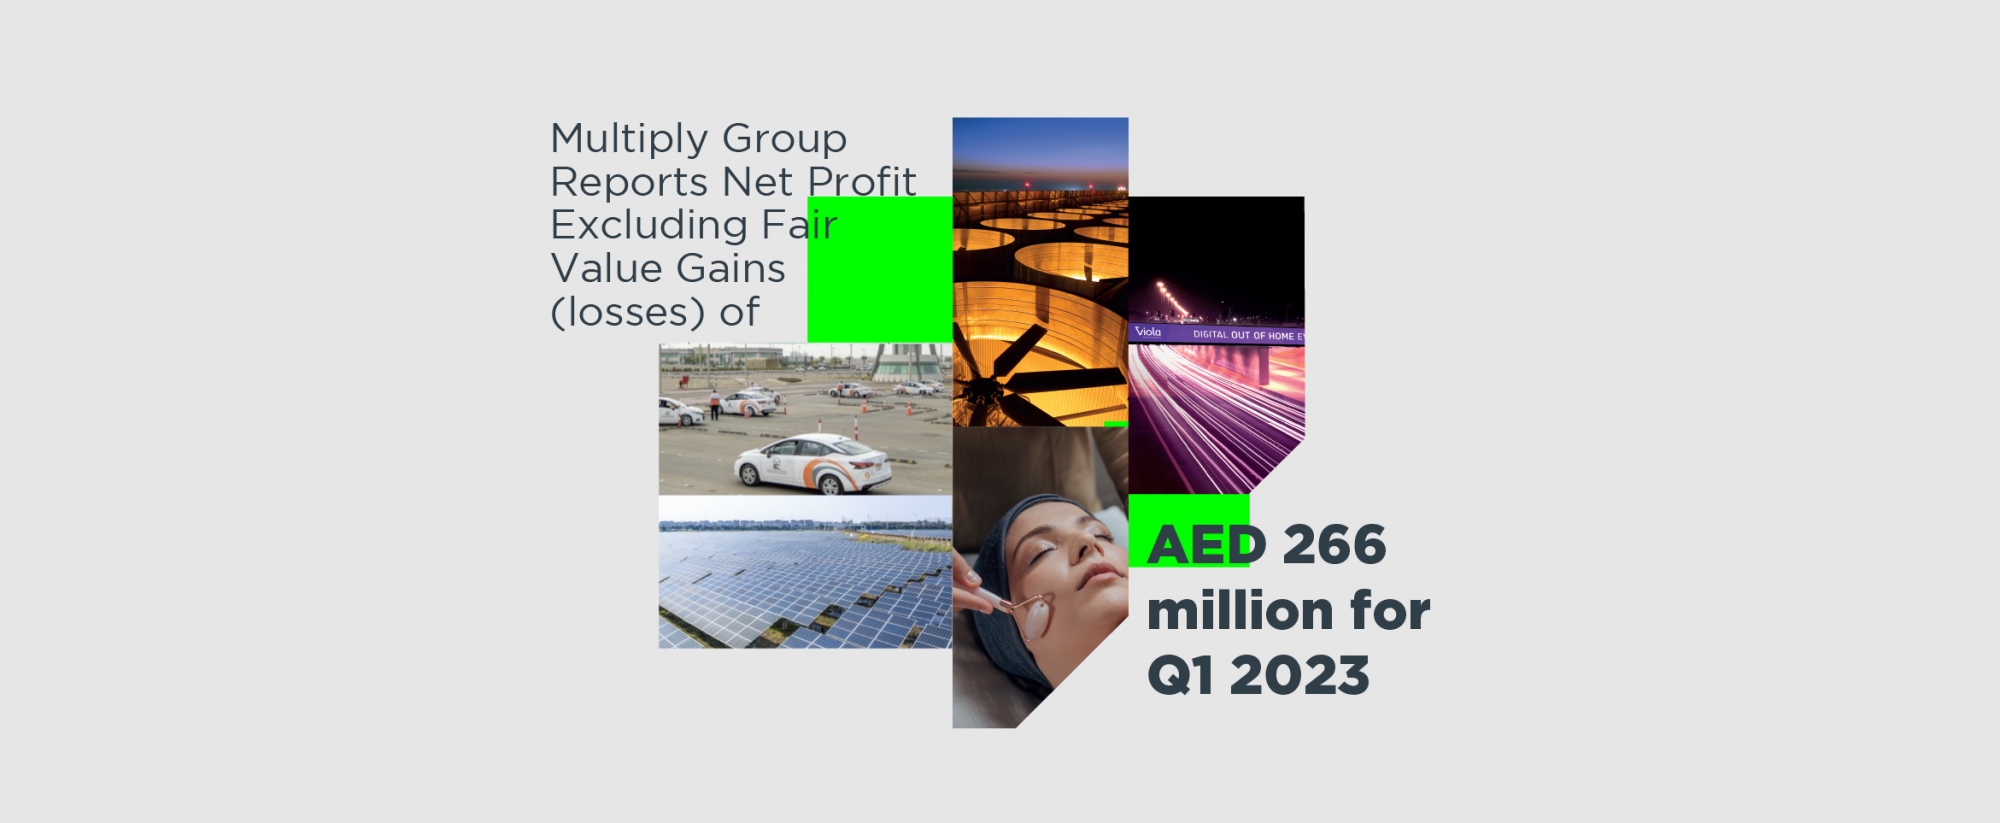 Multiply Group Reports Net Profit Excluding Fair Value Gains (losses) of AED 266 million for Q1 2023, a 241% Growth Compared to the Same Period Last Year – Closes Q1 with AED 0.51 million in Net Profit